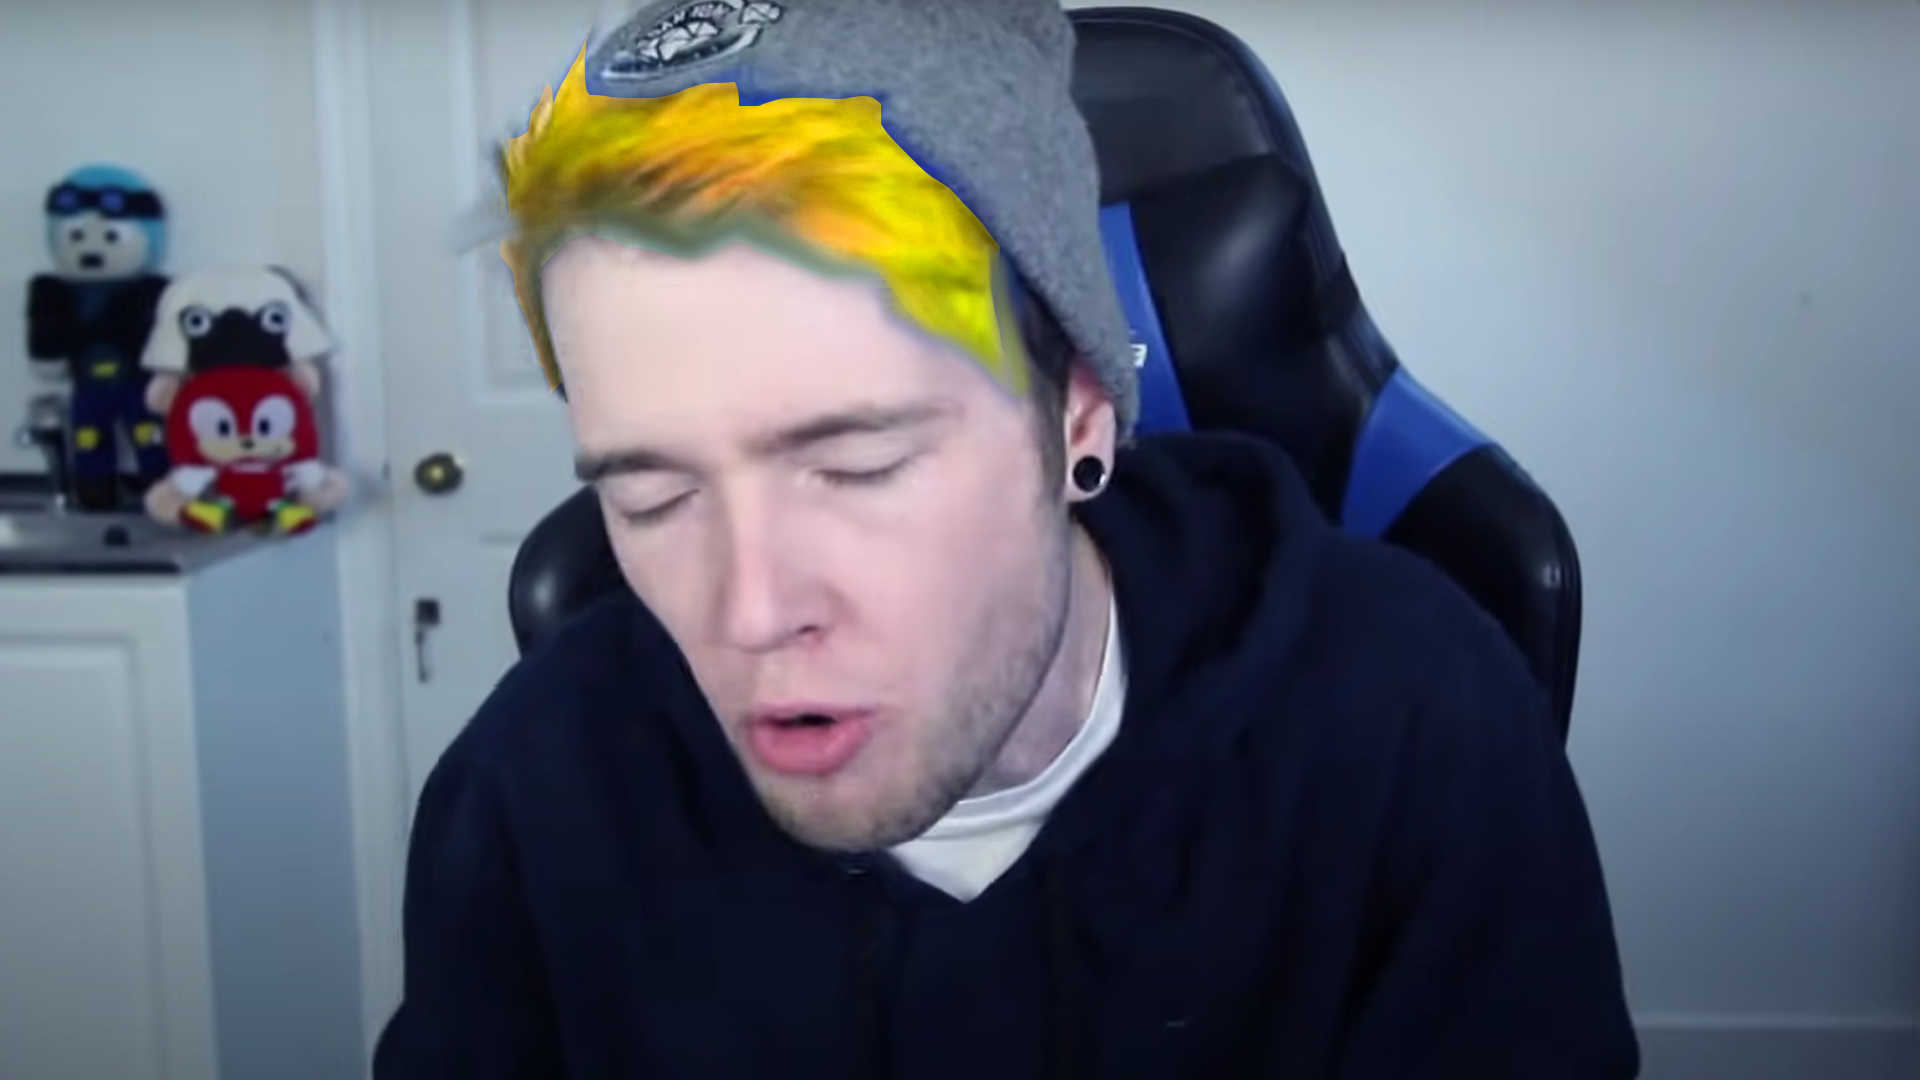 2. How to Get Dantdm's Iconic Pink and Blue Hair - wide 5